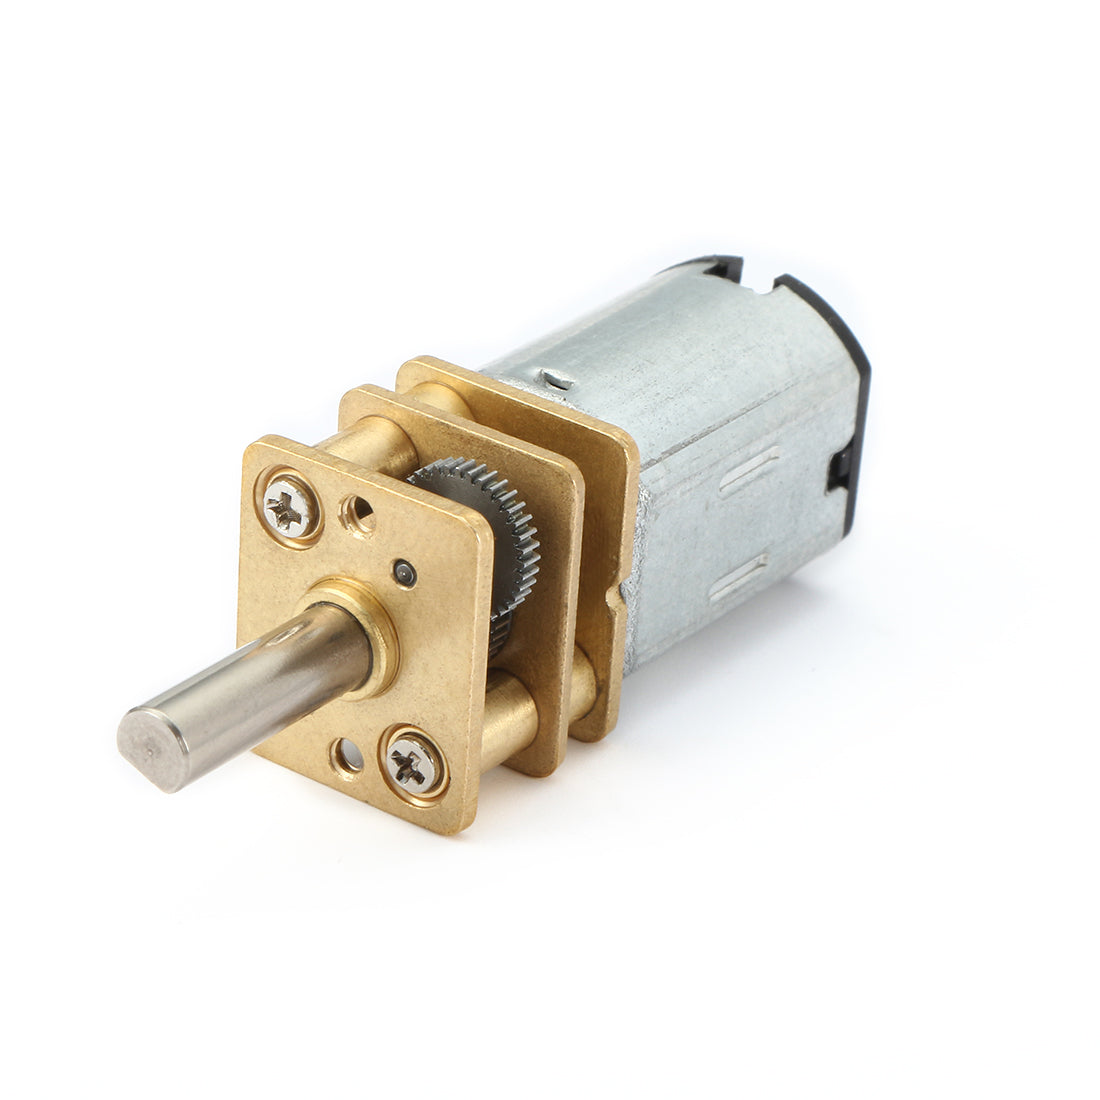 uxcell Uxcell DC6V 100RPM Micro Gear Box Speed Reduction Motor Electric Geared Motor with 2 Terminals